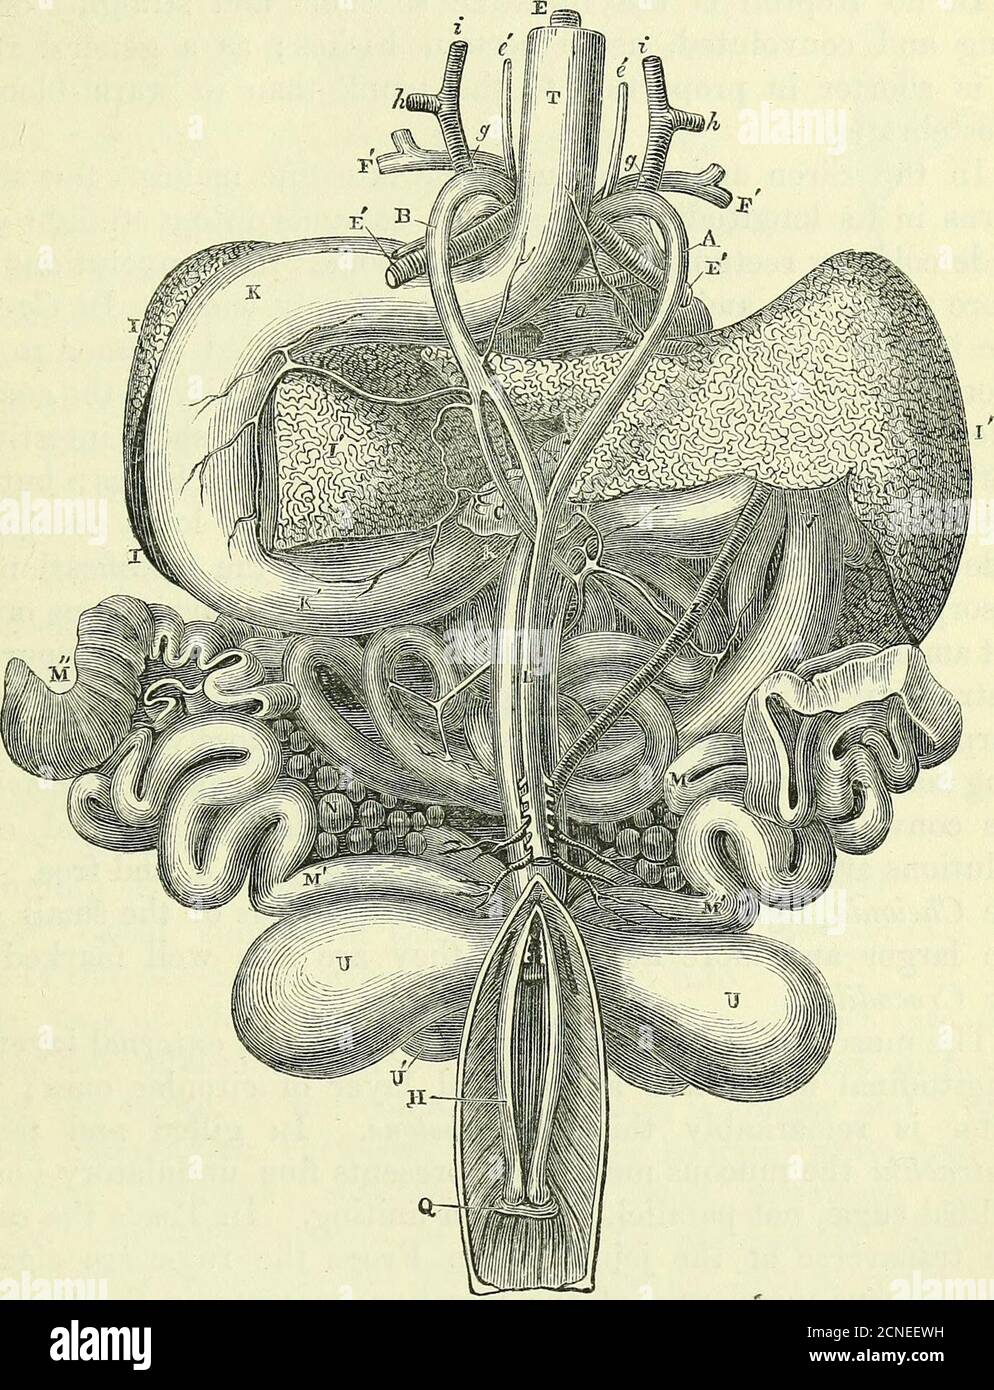 . On the anatomy of vertebrates [electronic resource] . Abdominal viscera of a Lizard, ccxxxv. In the stomach of a Crocodilus acutus, from 1 ccxxxvi. vol. ii. p. 357. 2 xx. torn. i. p. 146, preps, nos. 514-516. 3 xx. vol. i. p. 146, prep. no. 518 A.Jamaica, Hunter found the whole of the feathers of a bird, with a few of the bones,which had lost all their earth, exactly similar to a bone which has been steeped in anacid....There were stones in the stomach of considerable size, larger, e. g. than theend of a mans thumb. ccxxxvi. vol. ii. p. 337. Dr. Jones (ccxlv. p. 94) found inthe stomach of an Stock Photo